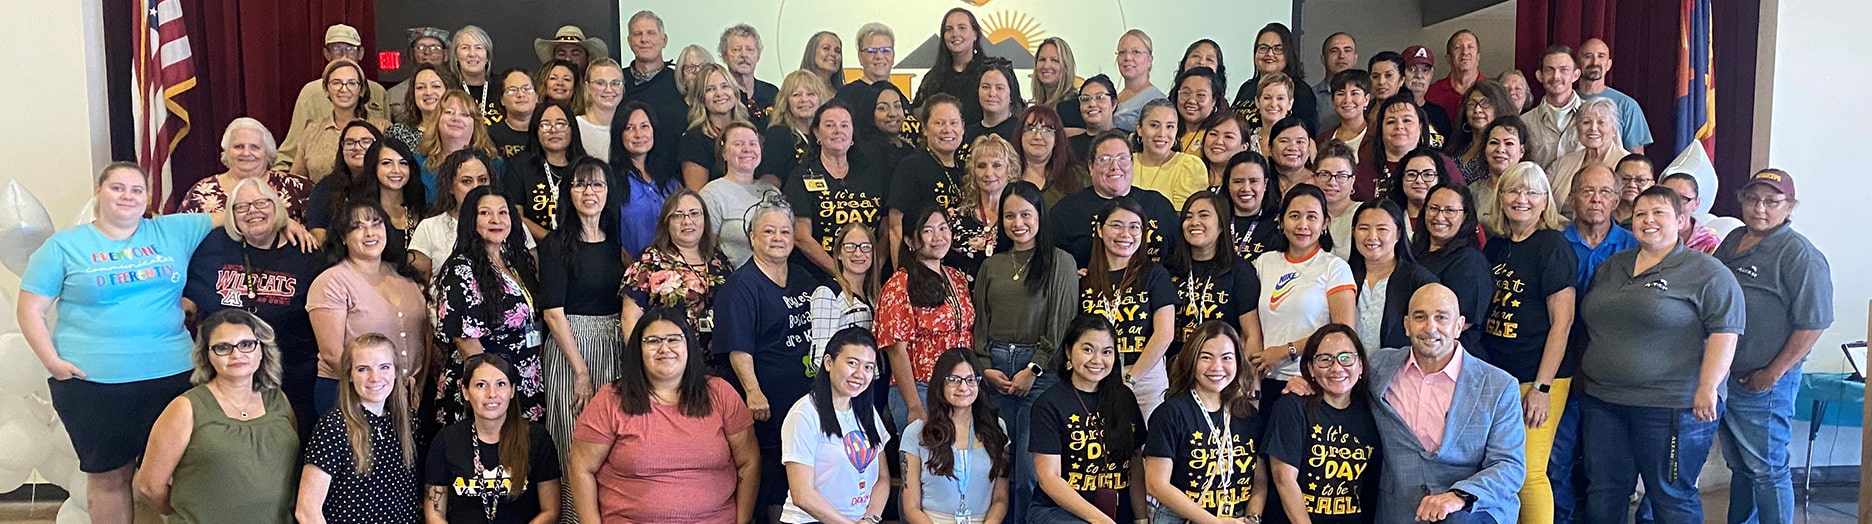 Altar Valley School District teachers and staff for the 2021-2022 school year